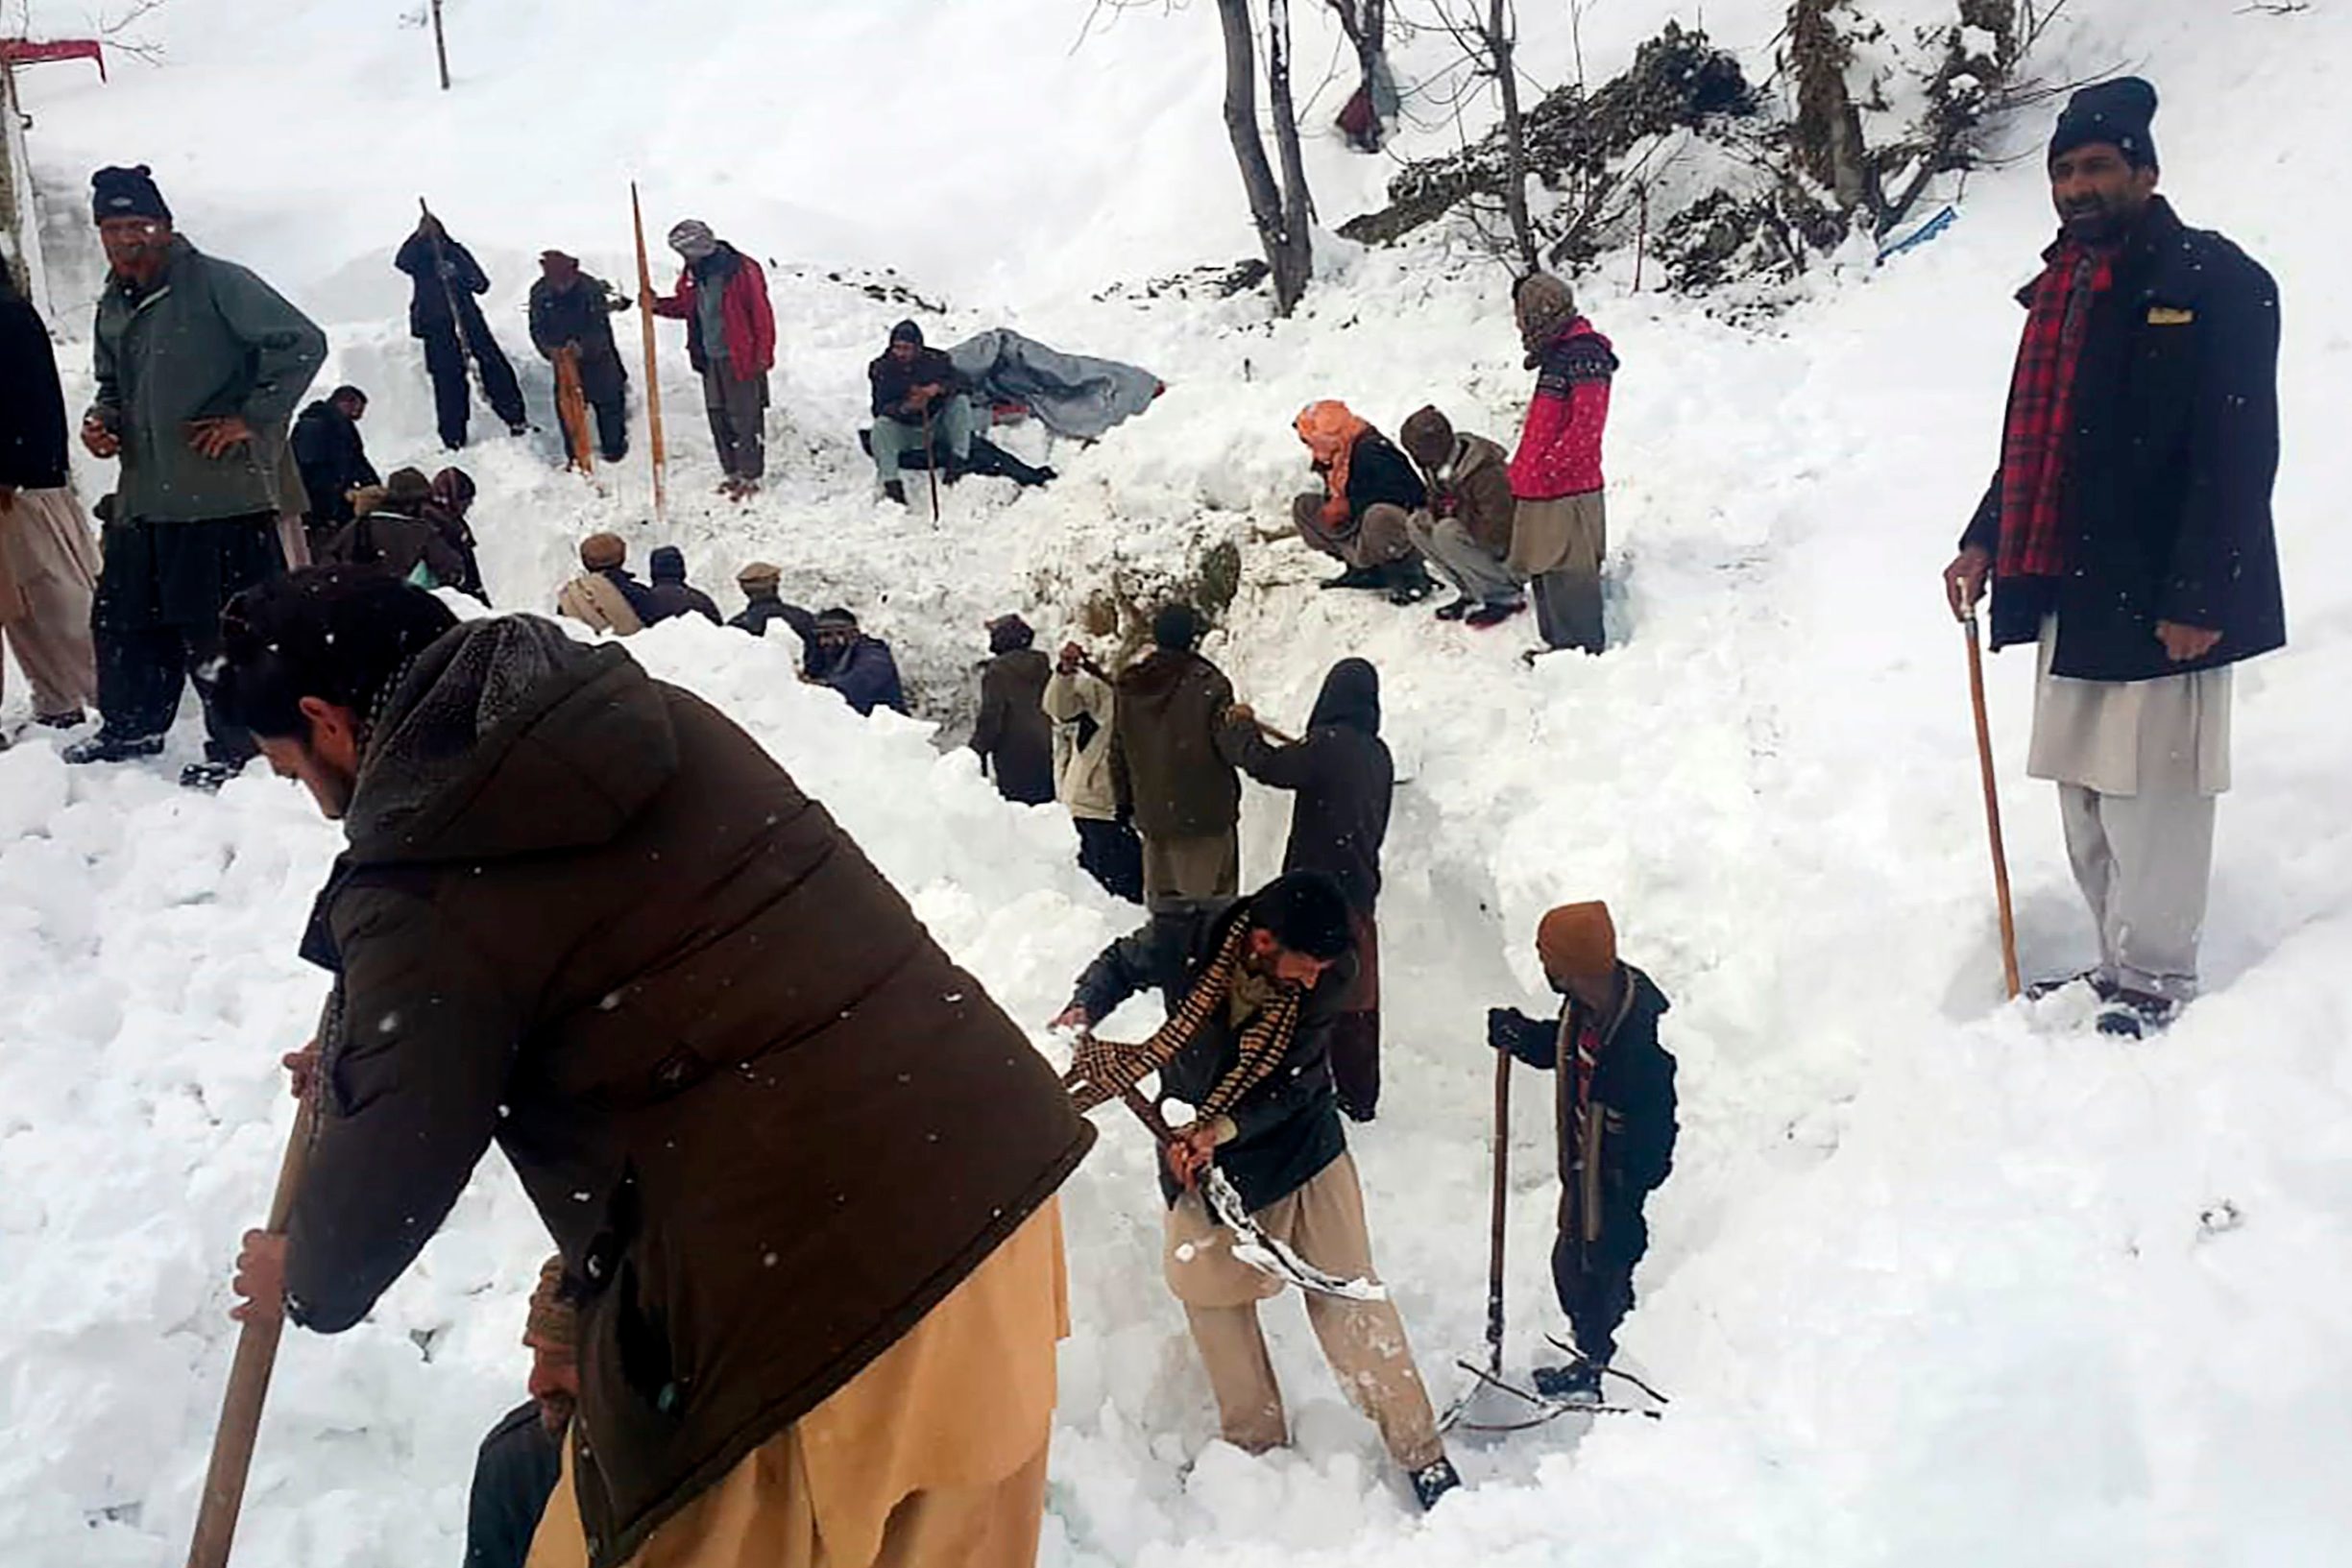 Local residents search for the avalanche victims in the snow in Neelum Valley, in Pakistan-administered Kashmir on January 15, 2020. - Avalanches, flooding and harsh winter weather killed more than 130 people across Pakistan and Afghanistan in recent days, leaving others stranded by heavy snowfall, officials said on January 14. (Photo by STR / AFP)